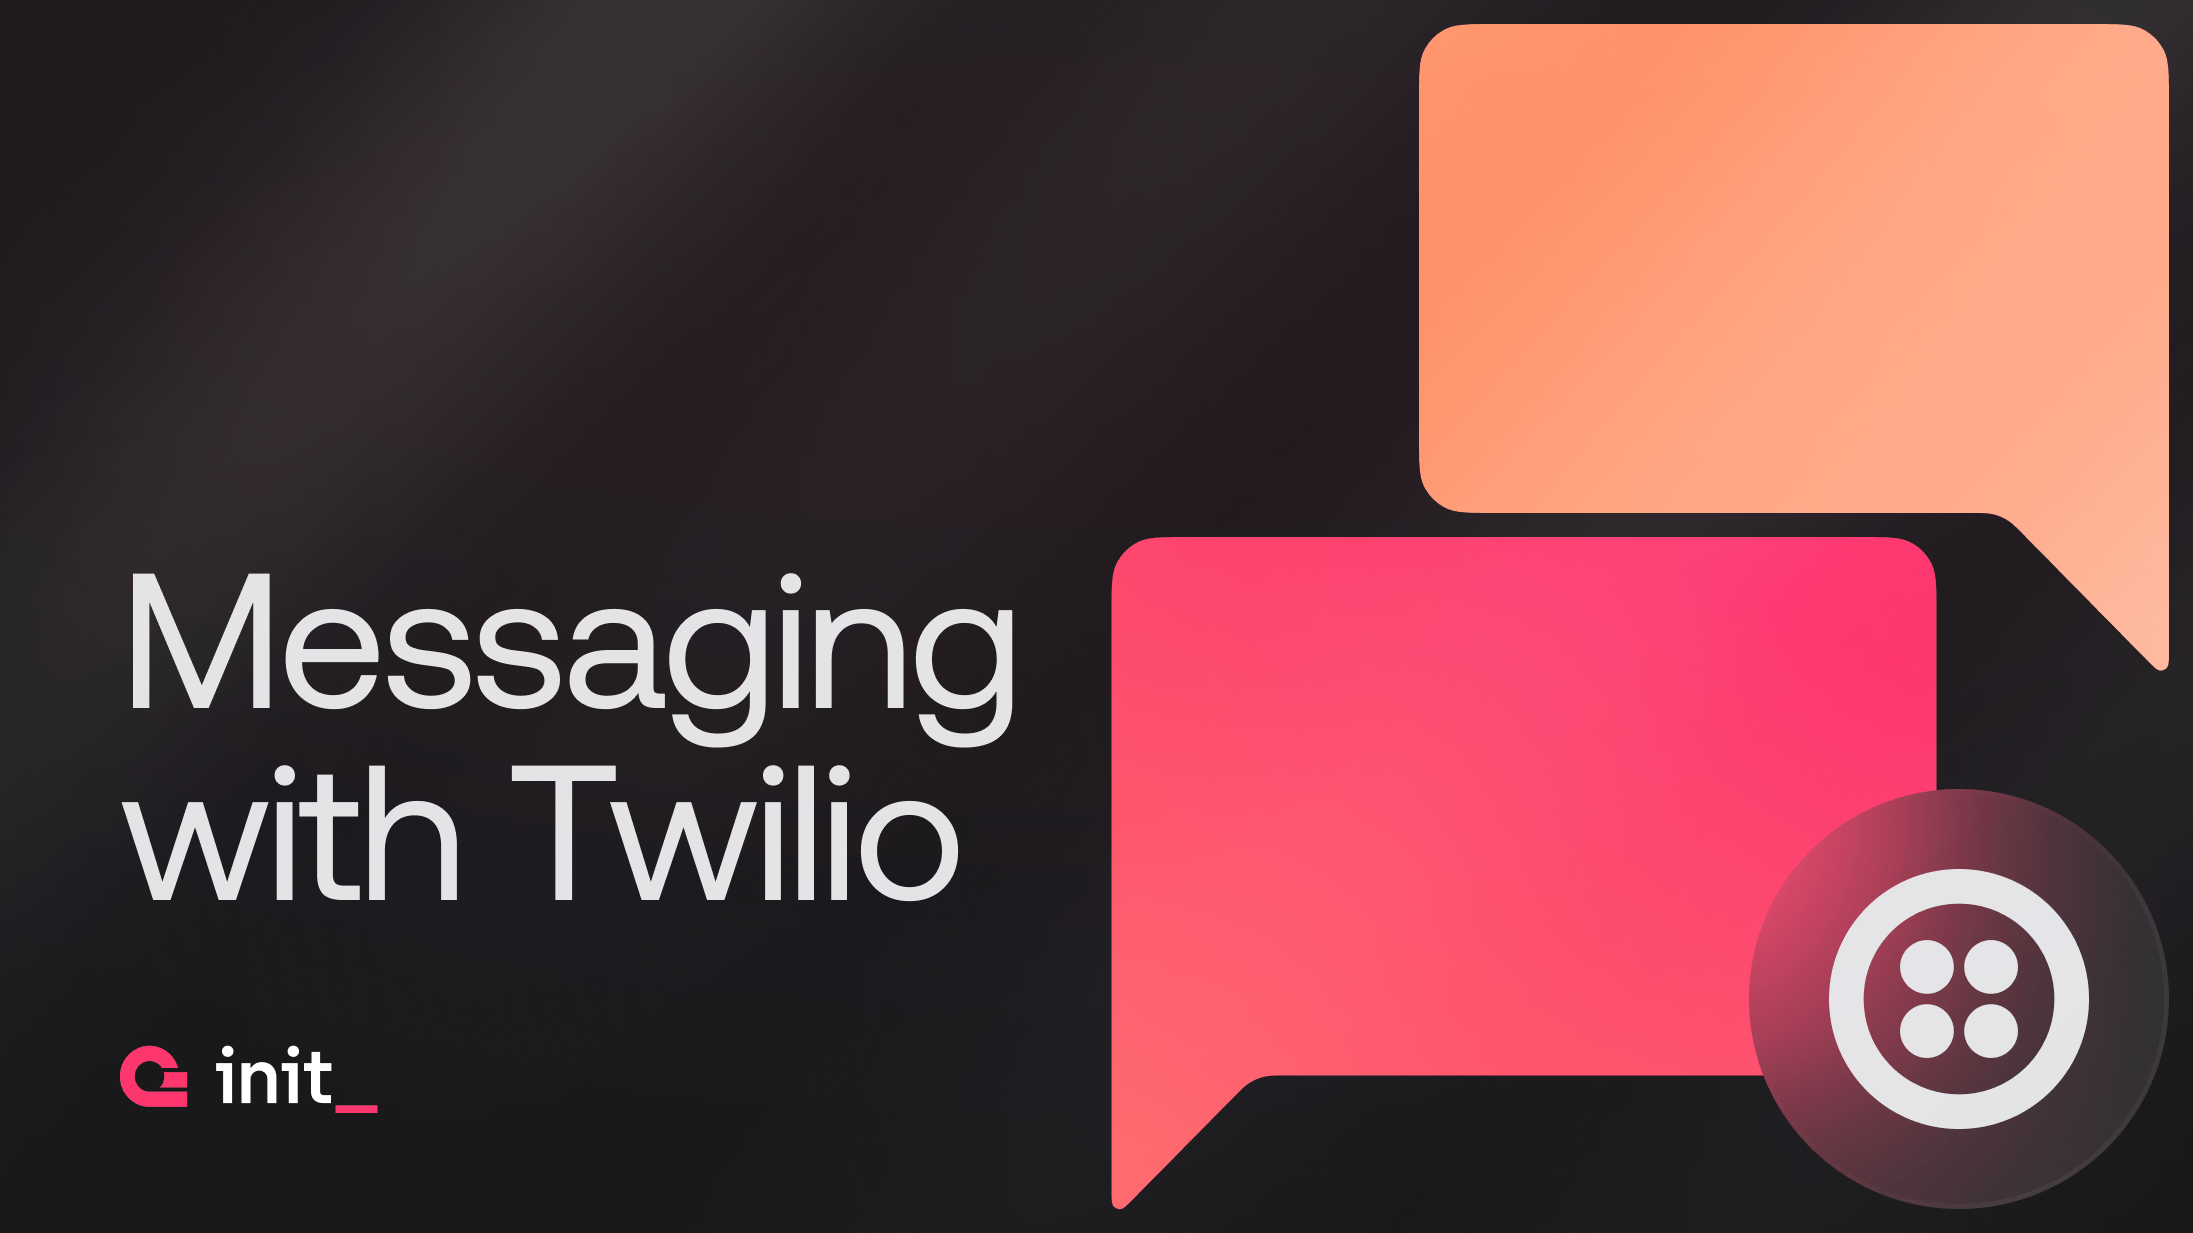 How tools like Twilio can simplify messaging for developers